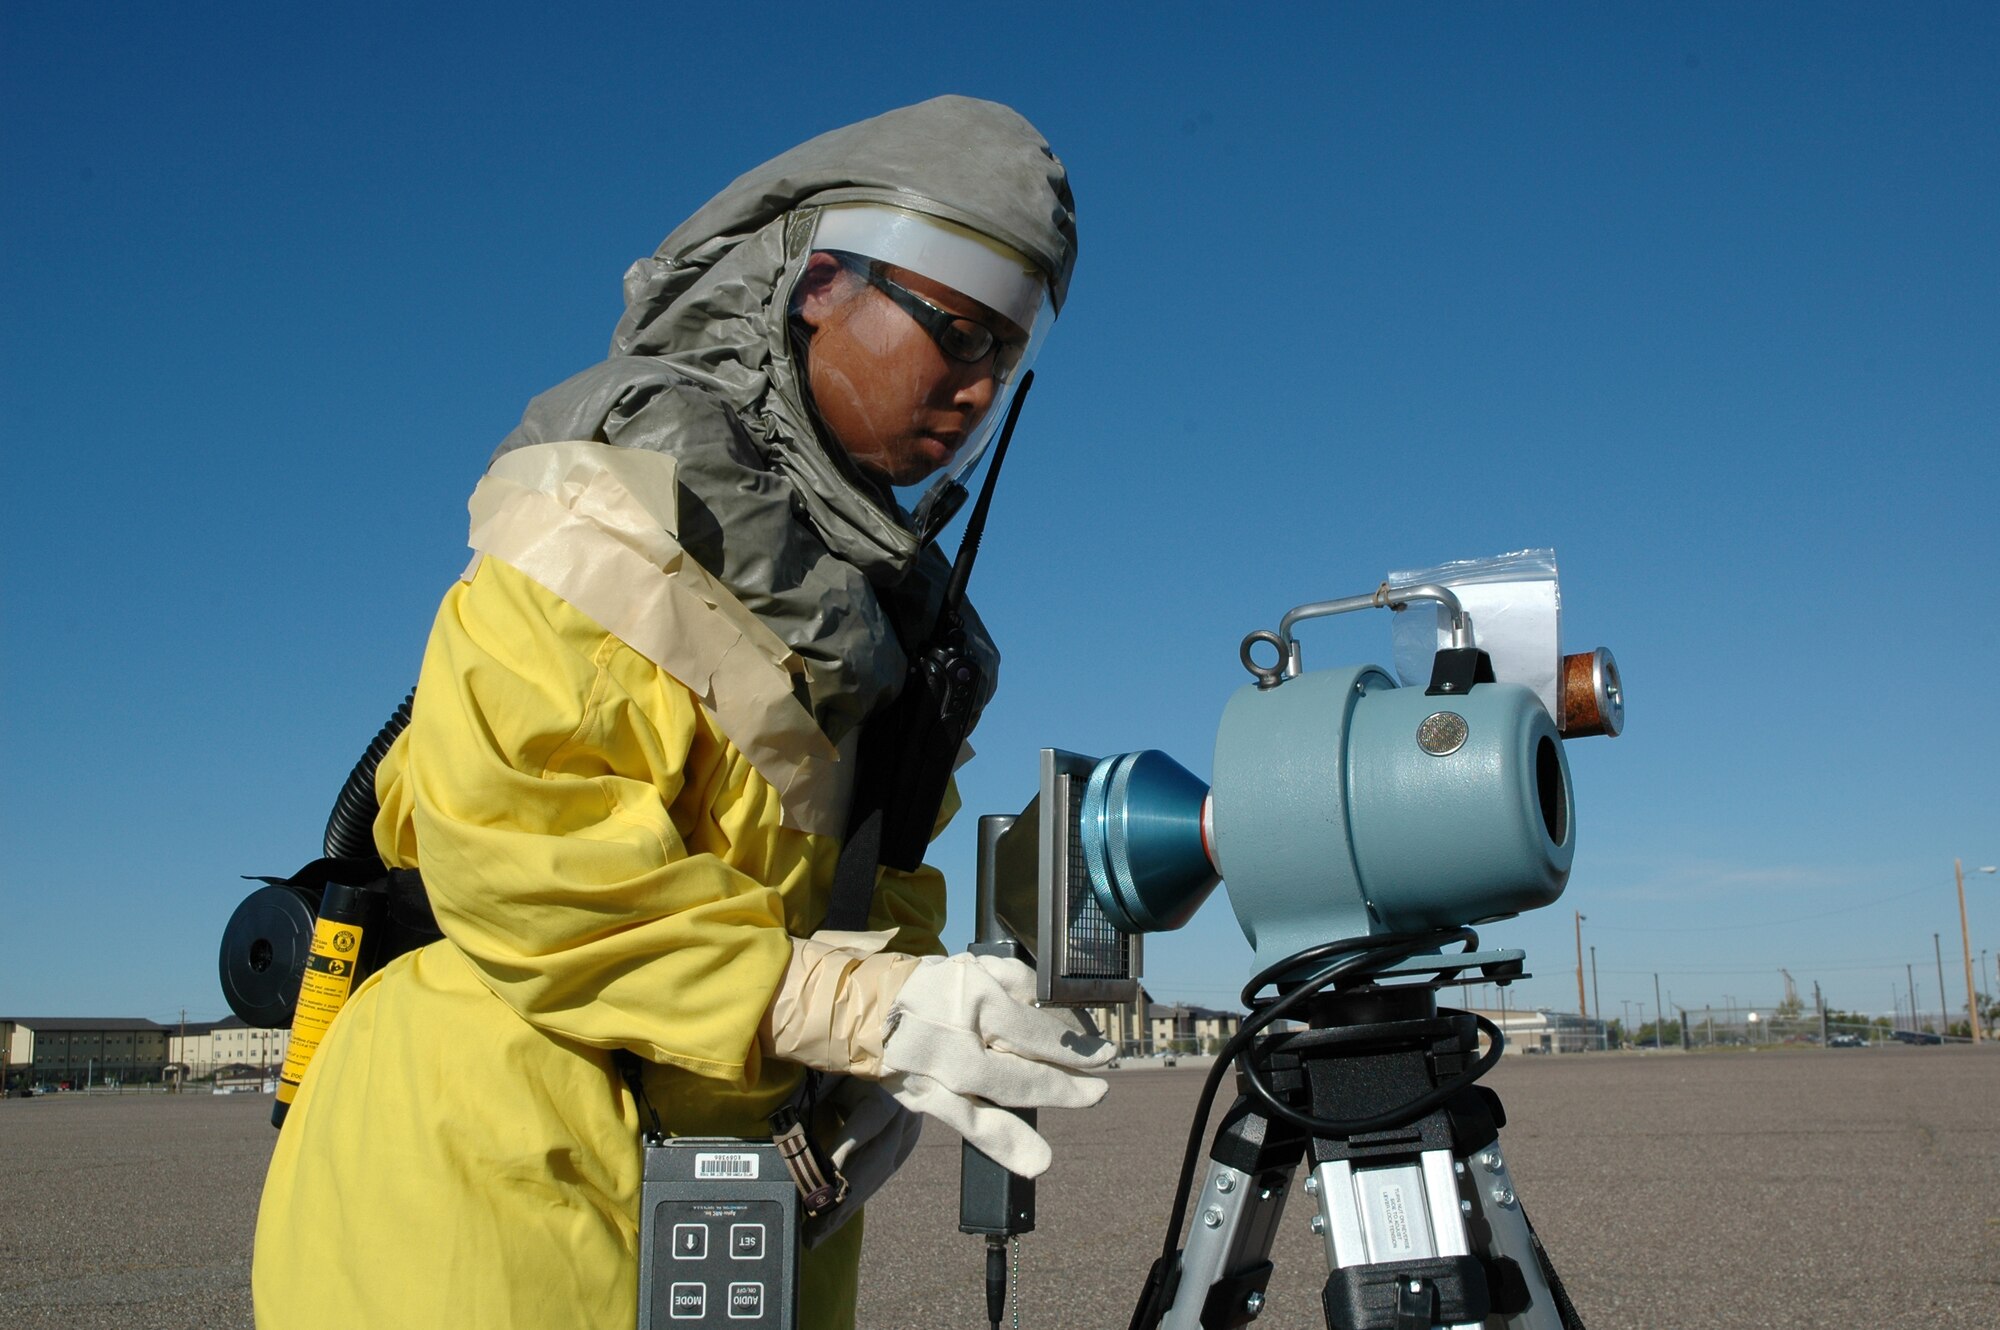 Airman 1st Class Michelle Smith, 341st Medical Operations Squadron bioenvironmental apprentice, simulates checking for Alpha particles collected by an instrument that collects airborne contaminates during a Response Task Force exercise Oct. 2, 2009, on the flight line. (U.S. Air Force photo/Senior Airman Dillon White)